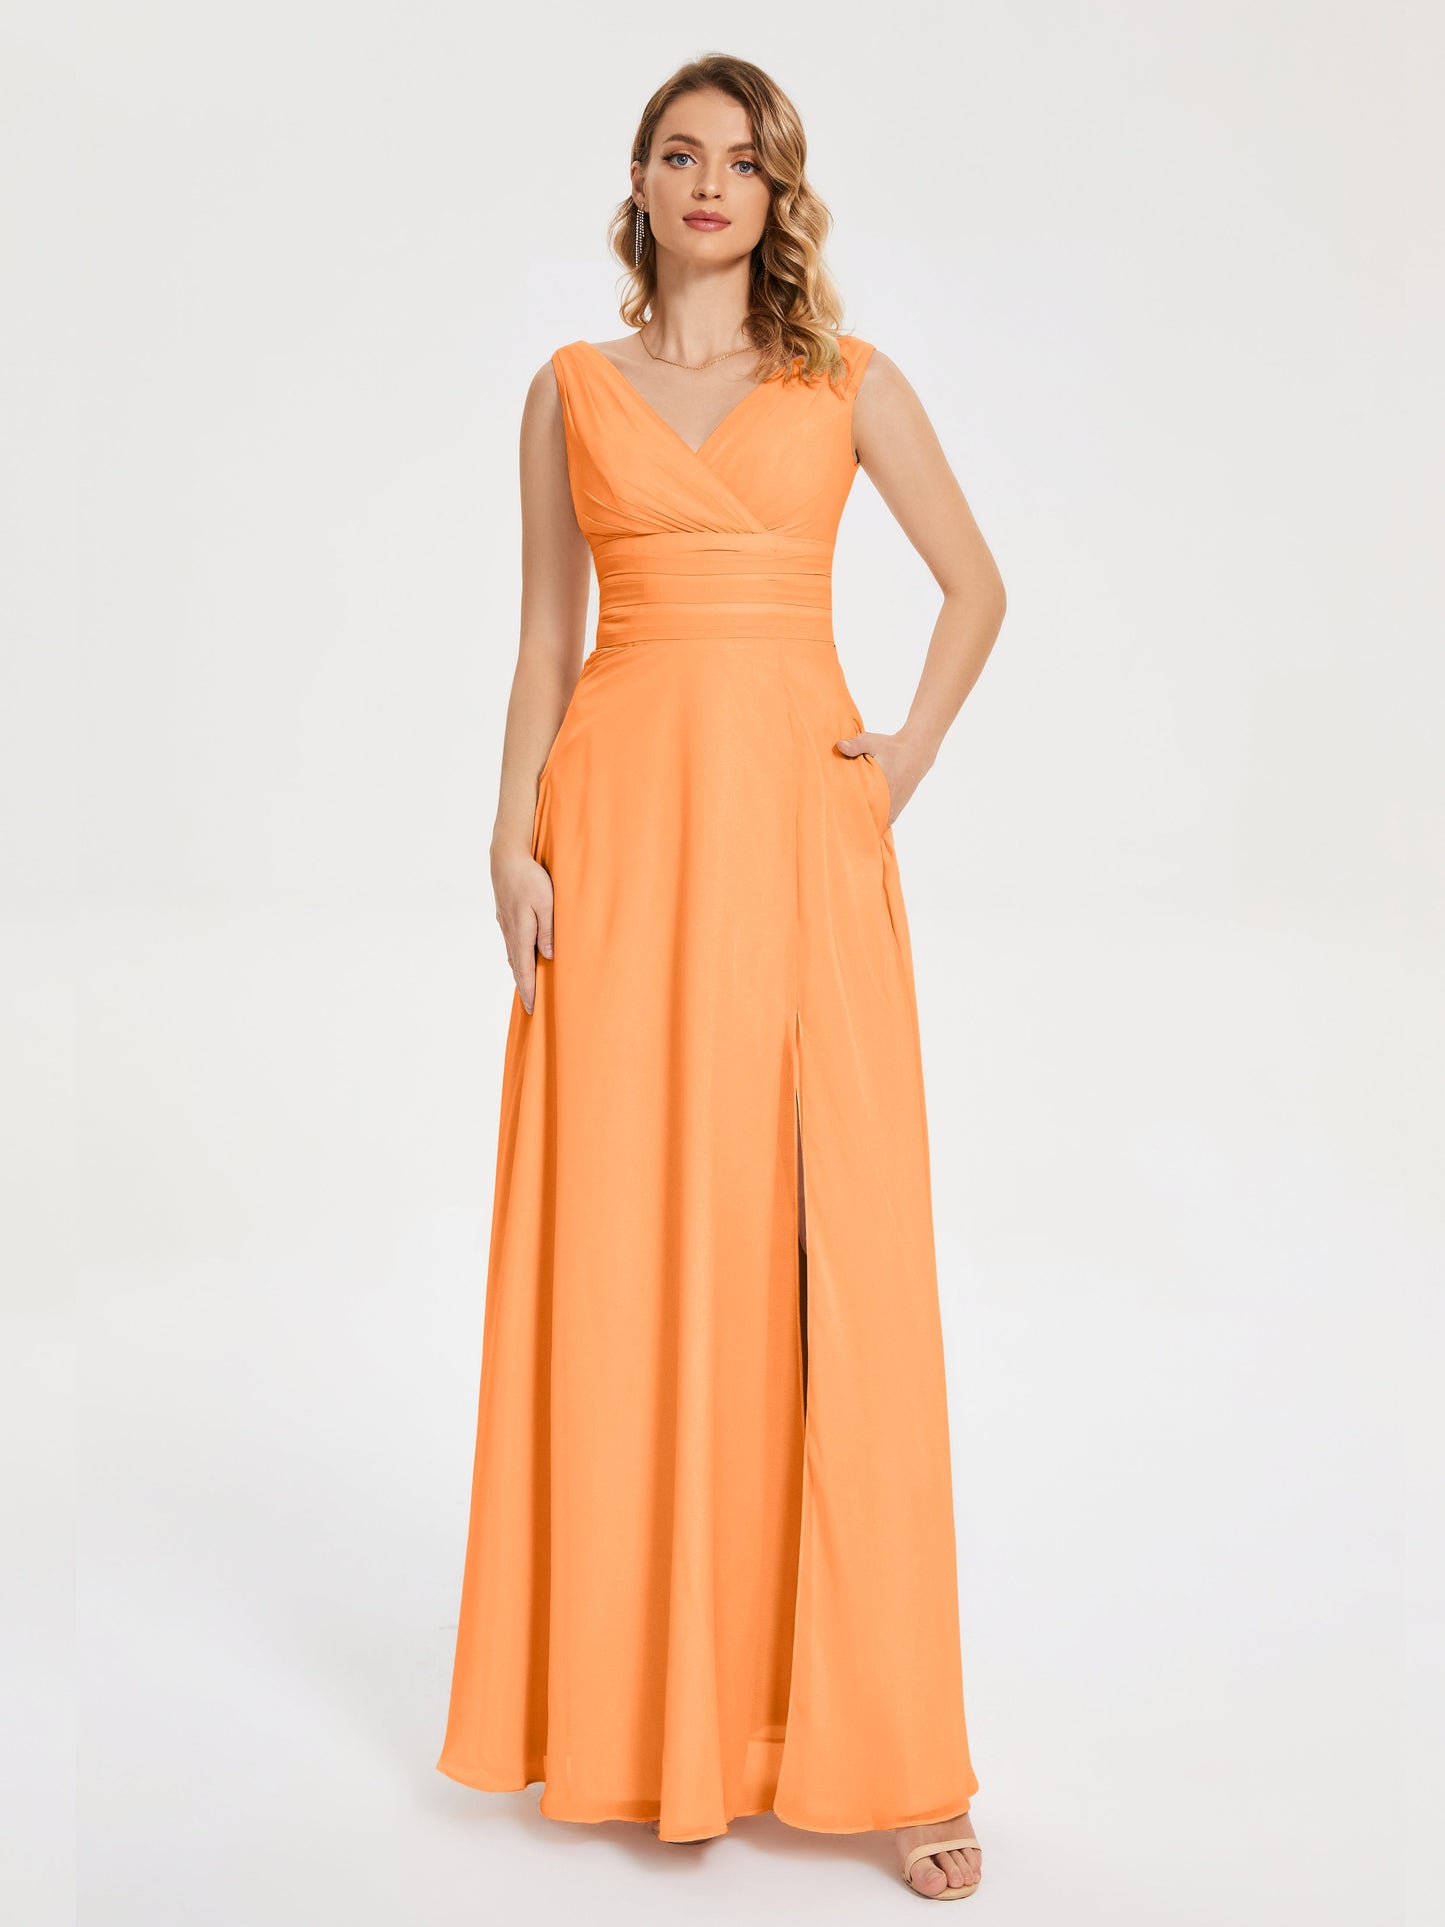 Simple V-neck Wedding Guest Dress with Pockets